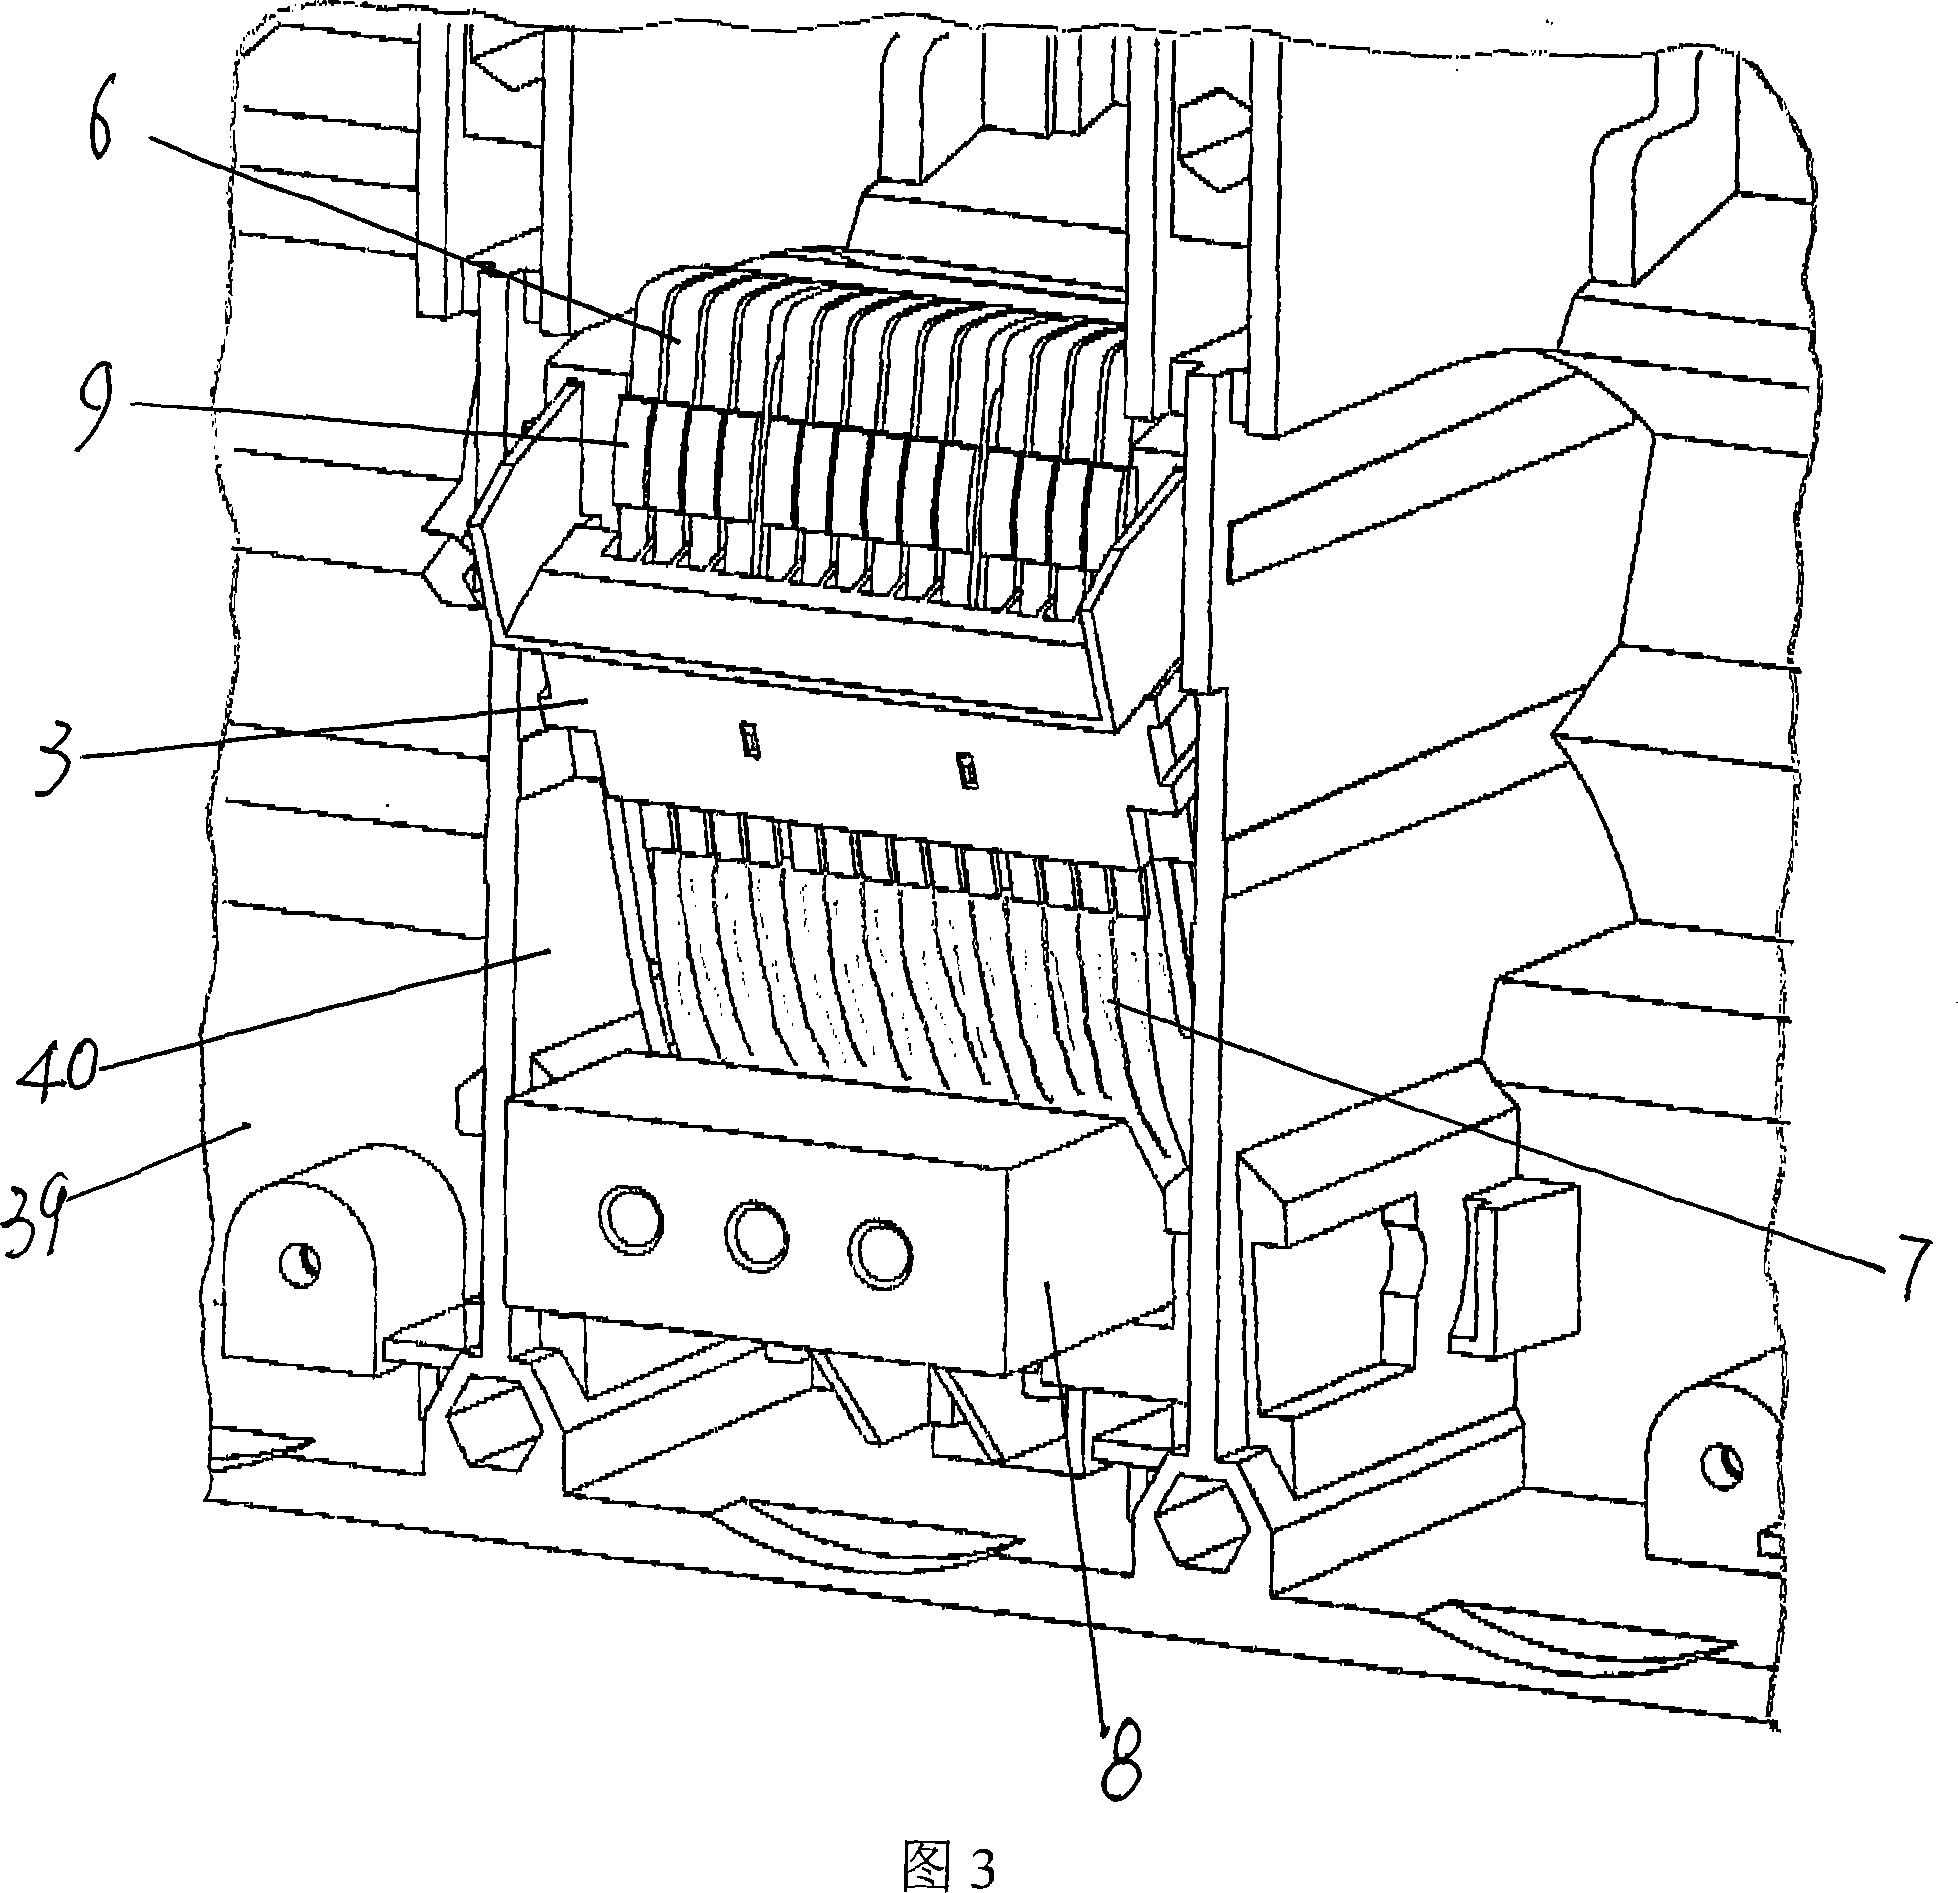 Movable contact of circuit breaker